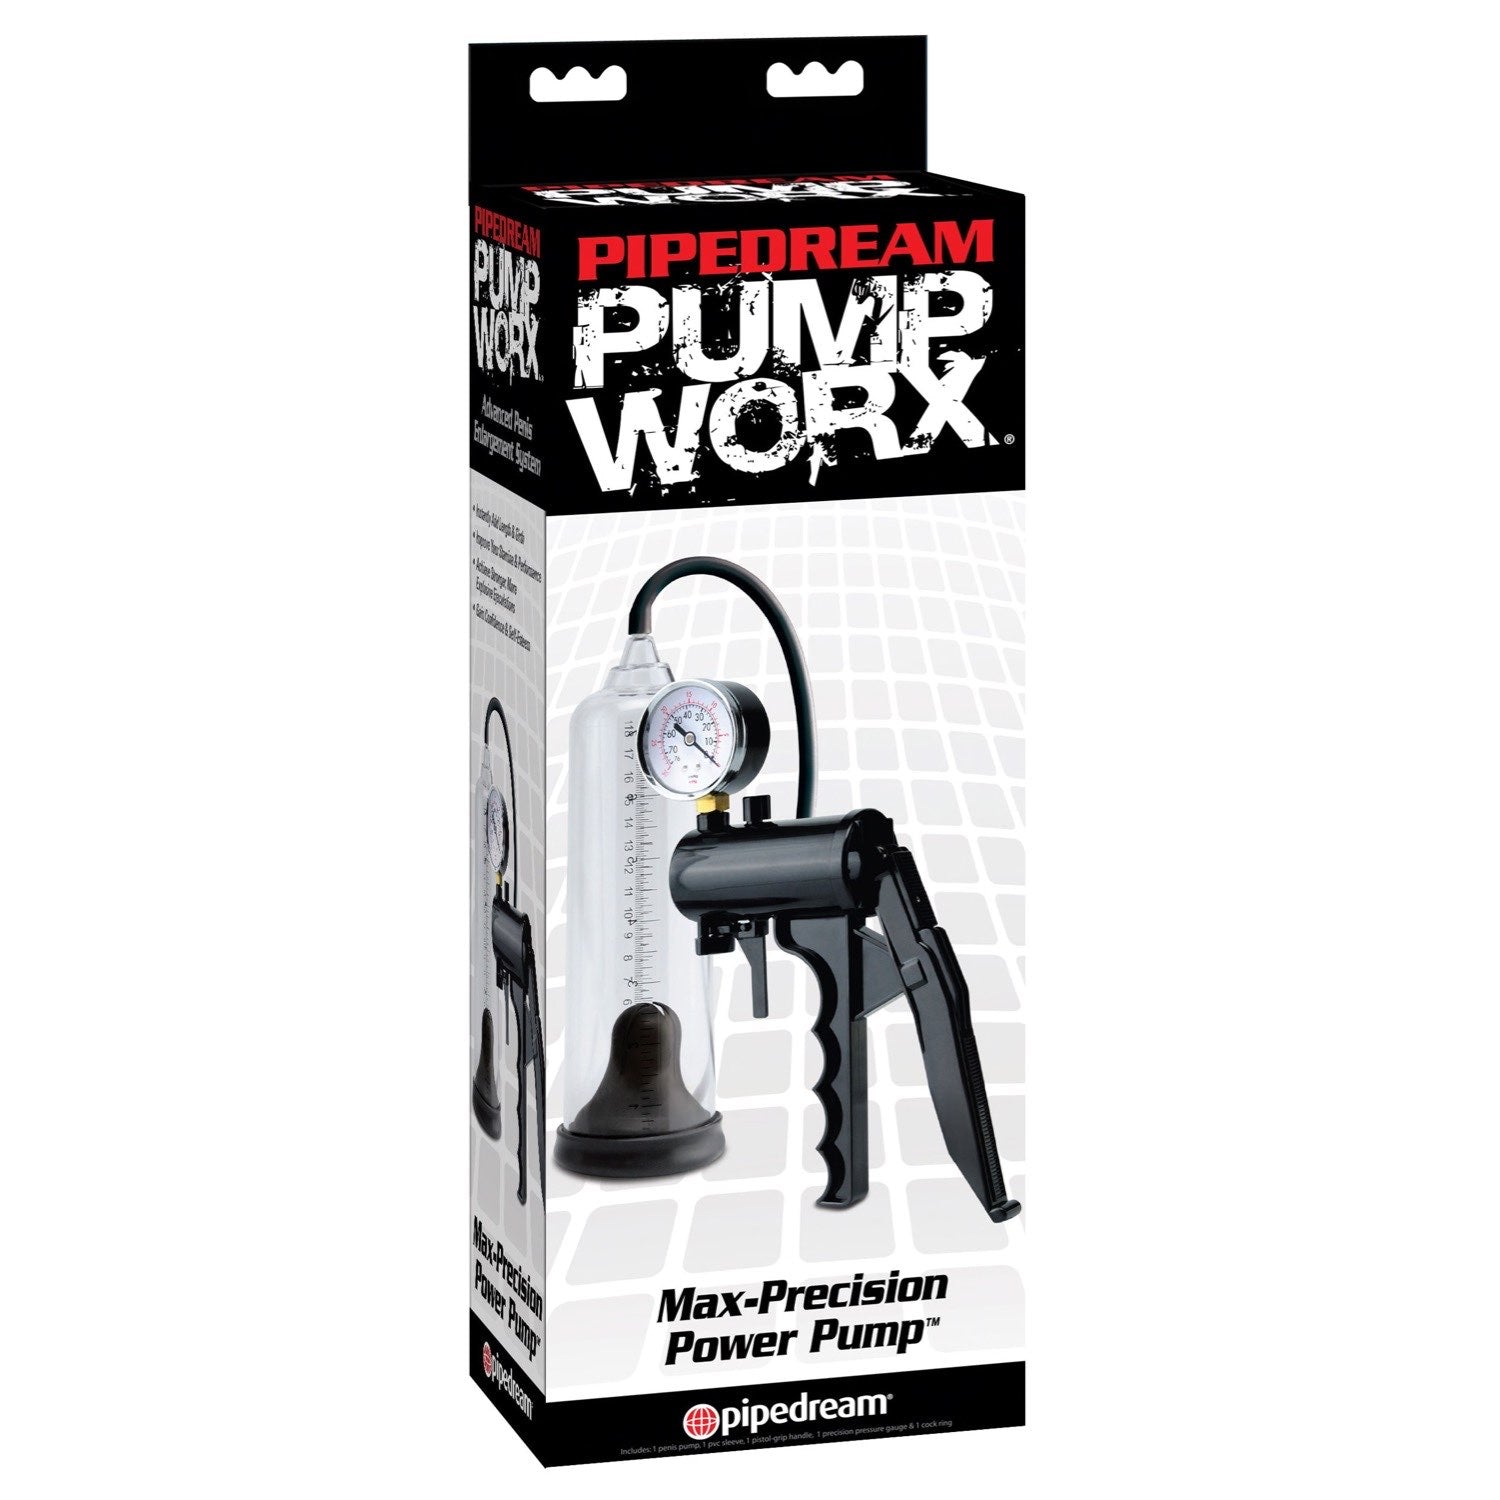 Pump Worx Max-precision Power Pump - Clear/Black Penis Pump with Gauge by Pipedream